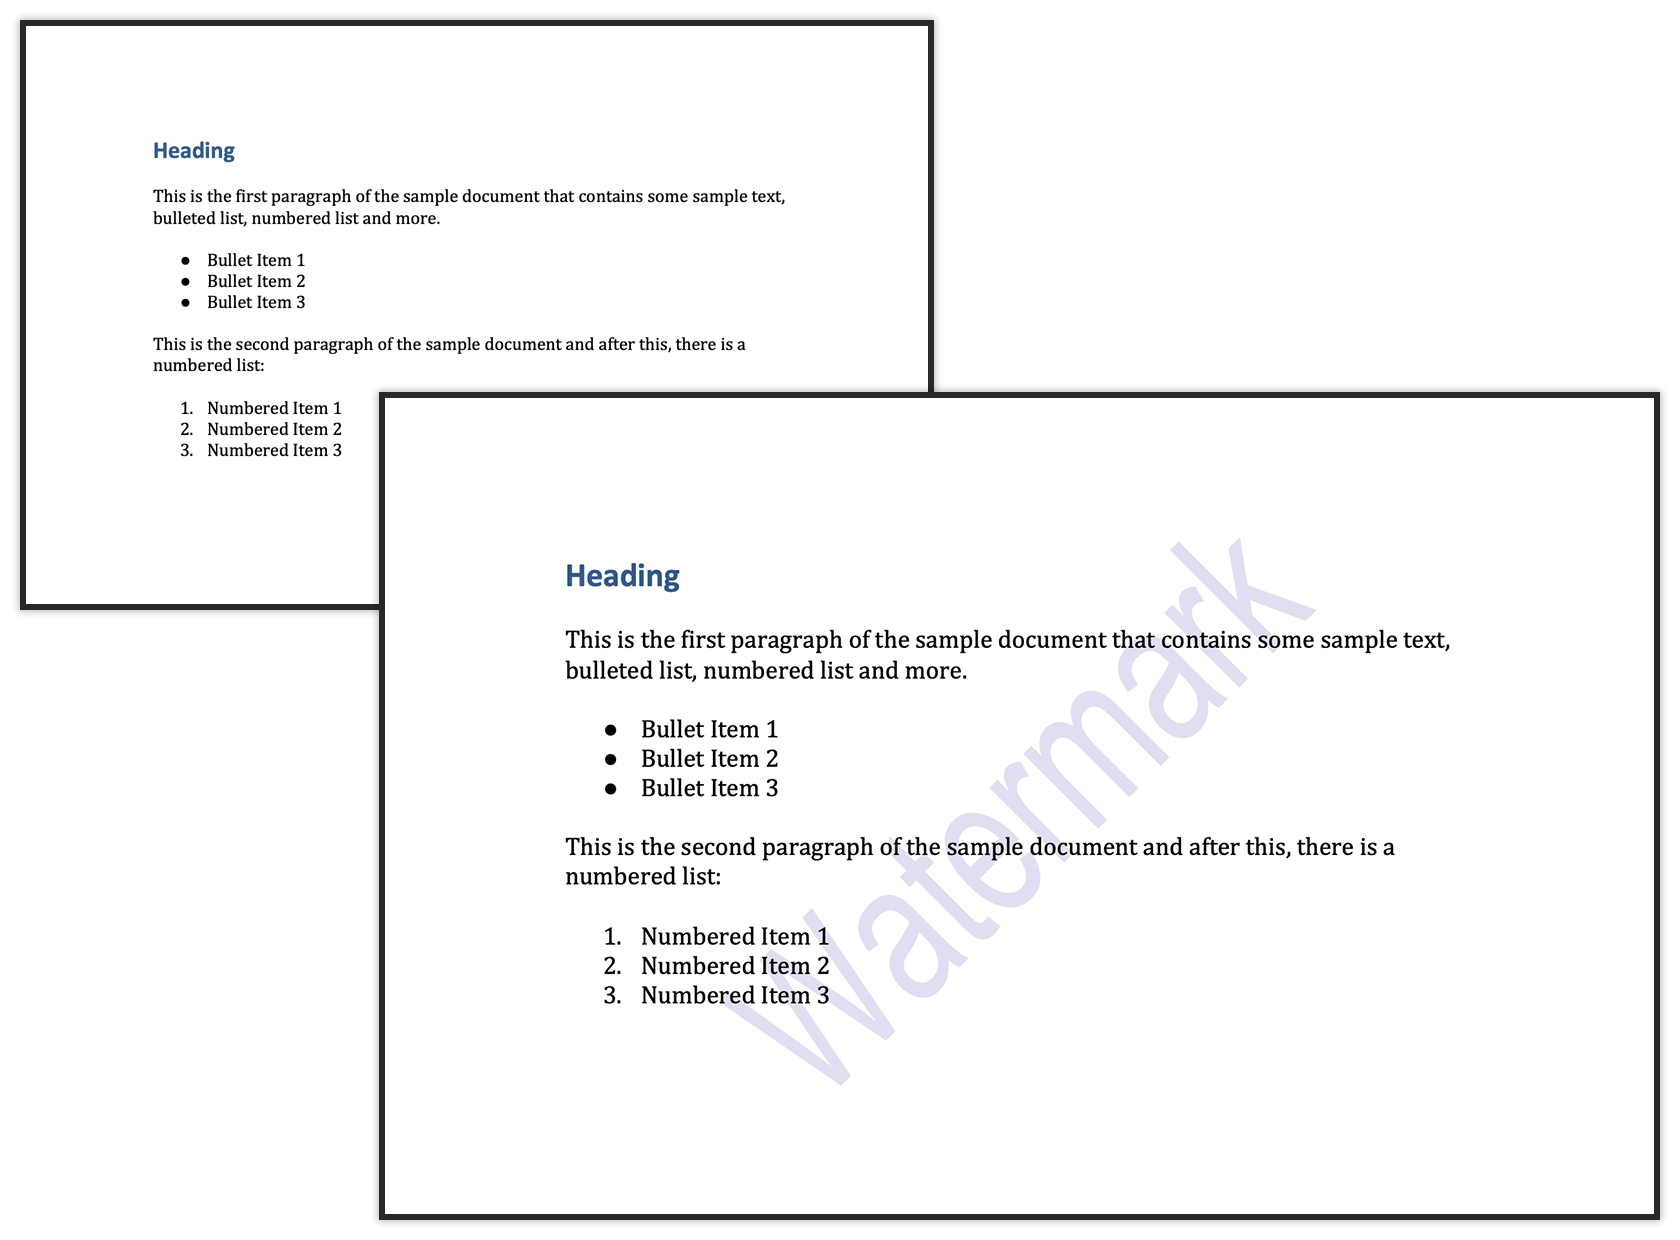 Example of Text Watermark in Word Document using Java